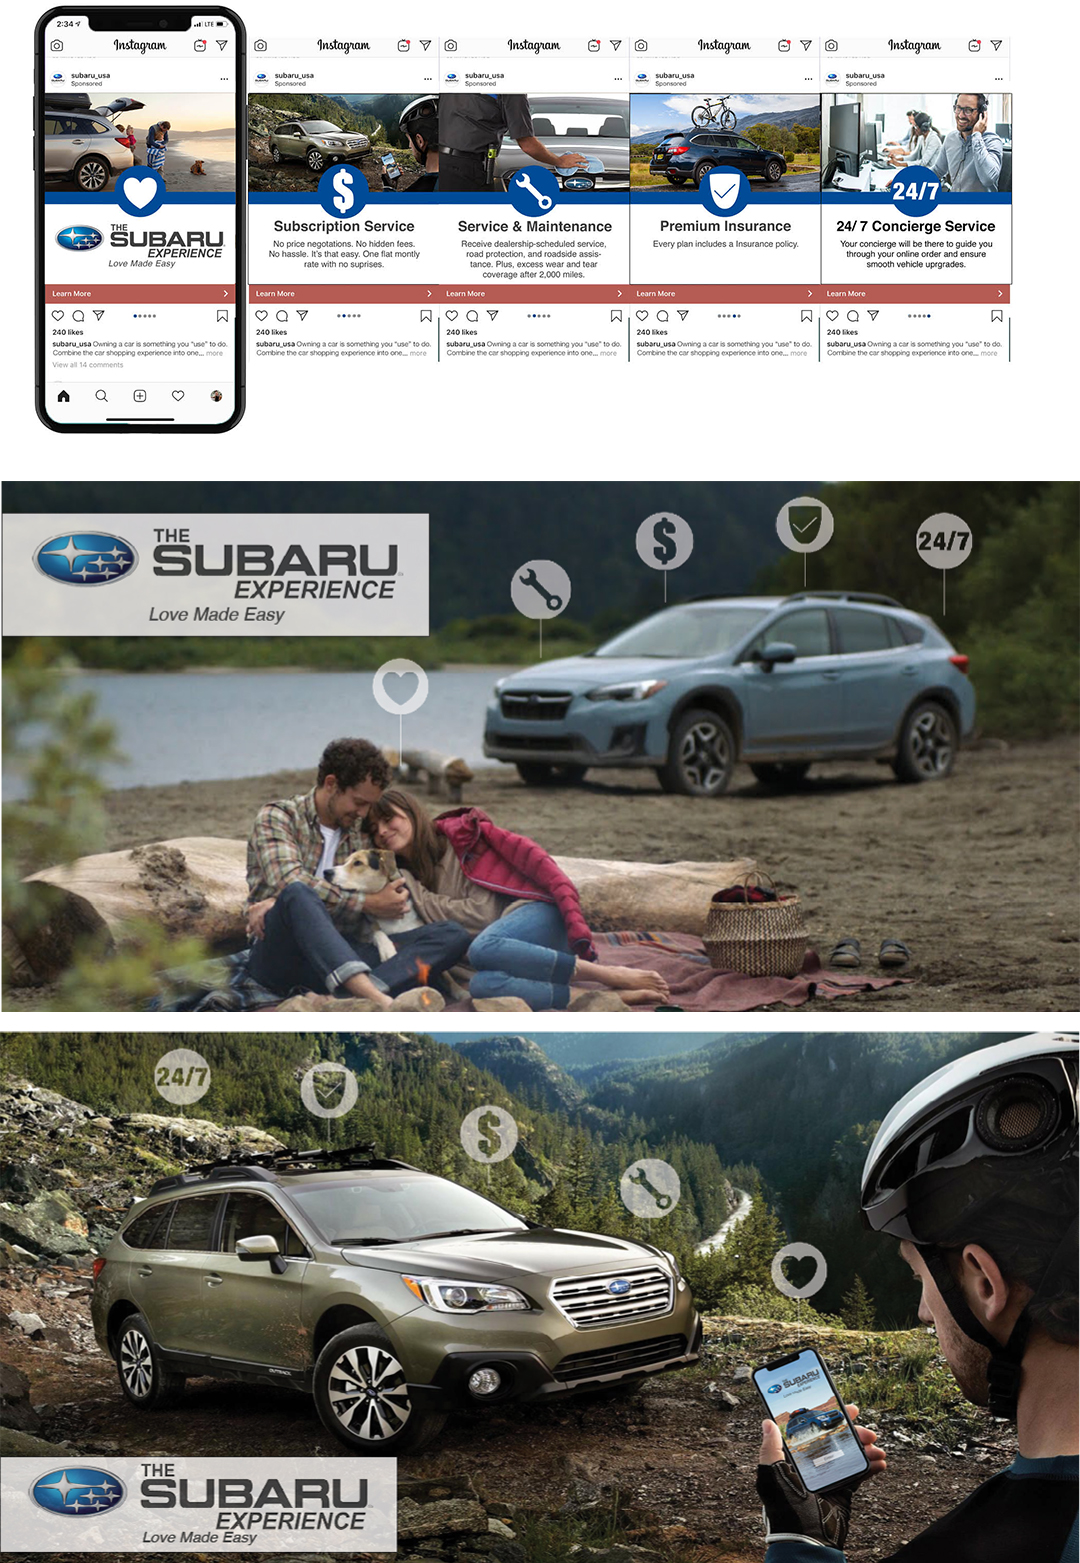 Emilee Drost, senior in advertising, Riley Holtrop (’19 advertising), and Jakob Hill (’19 advertising), received Gold in the Elements of Advertising Category for their “Love Made Easy” social media campaign for Subaru.